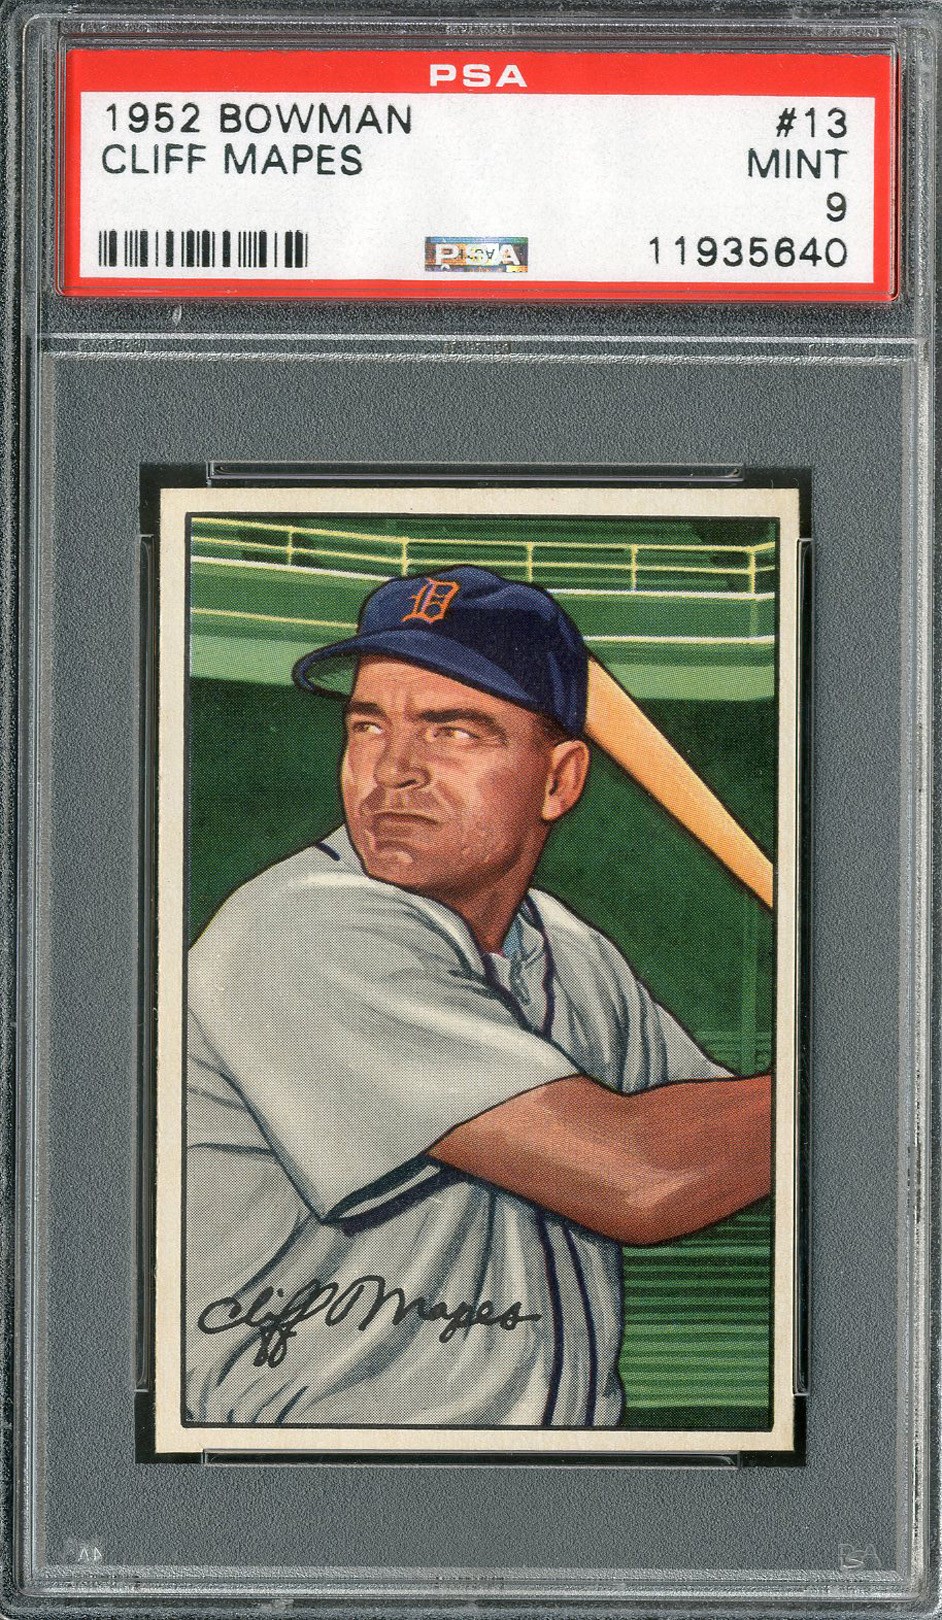 Baseball and Trading Cards - 1952 Bowman #13 Cliff Mapes PSA MINT 9